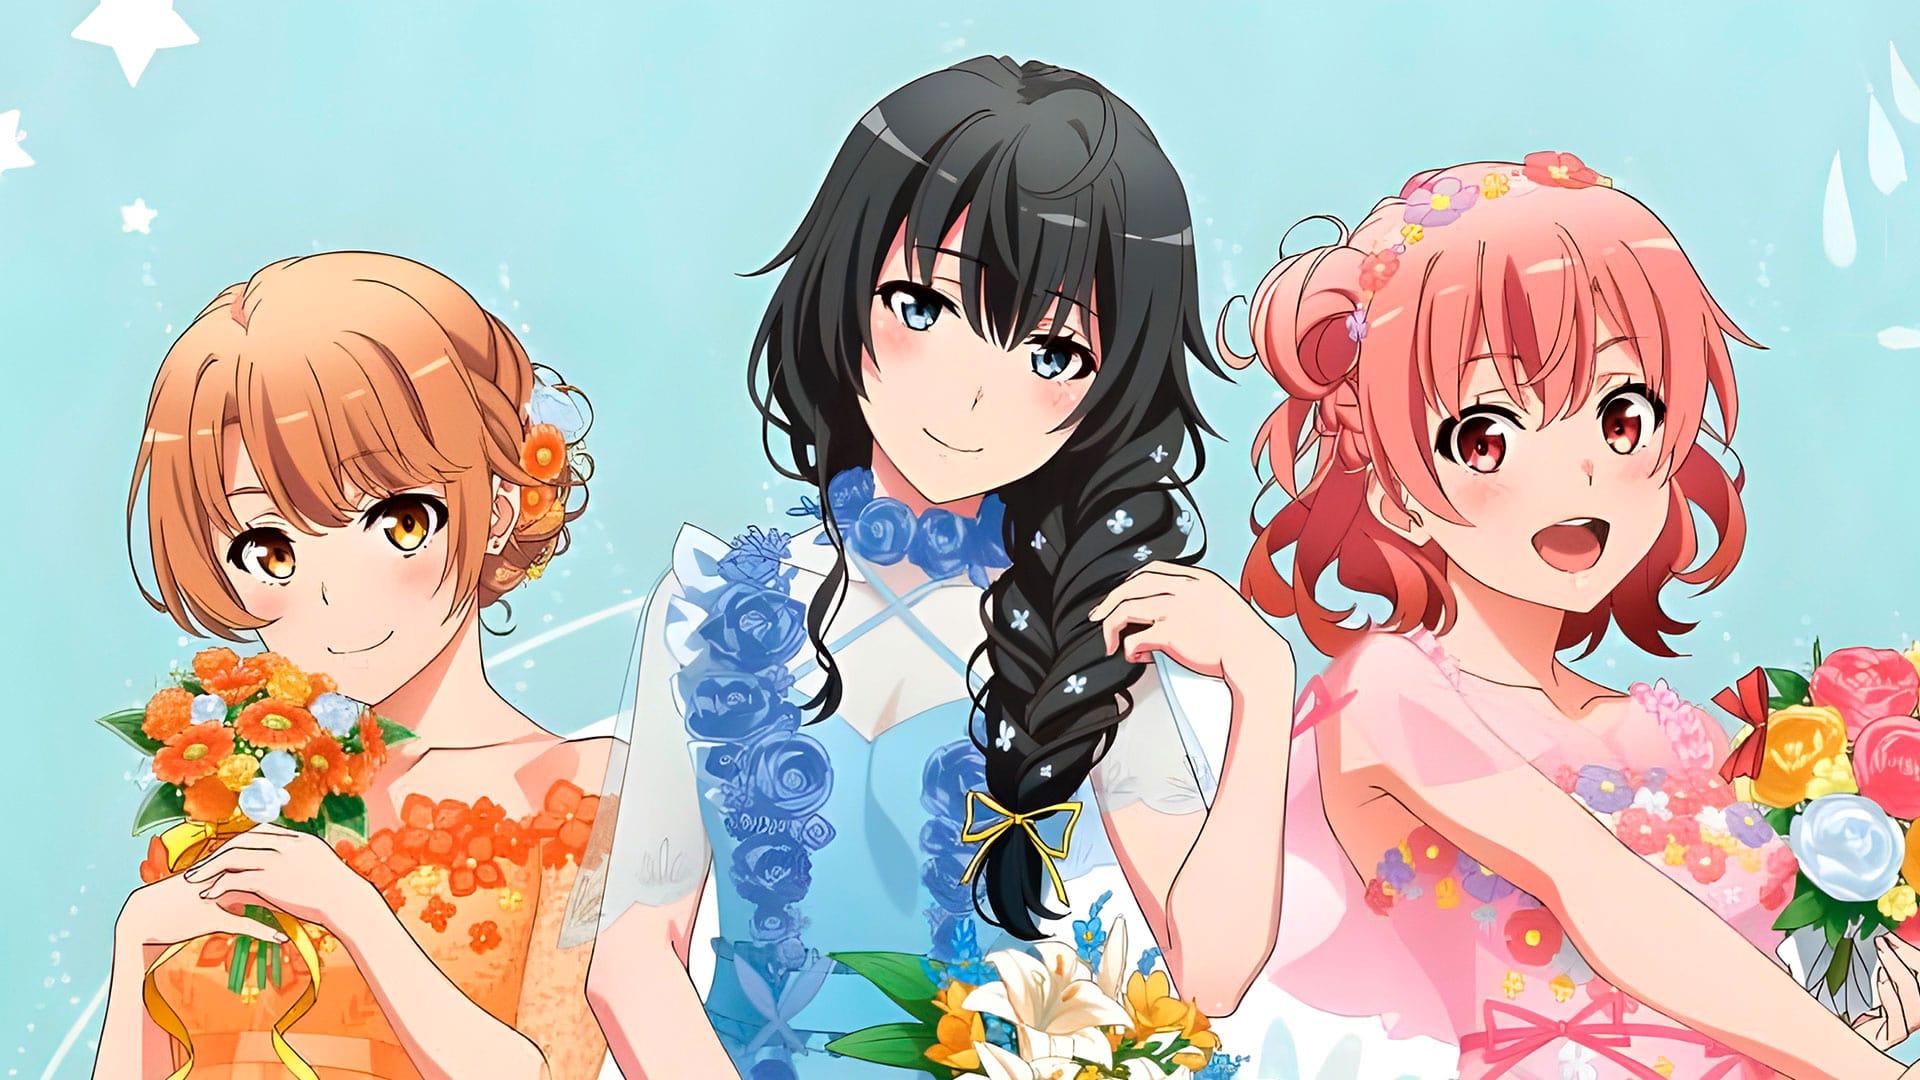 Oregairu Girls Wear Bunny Girl Costumes for Don Quijote Collaboration